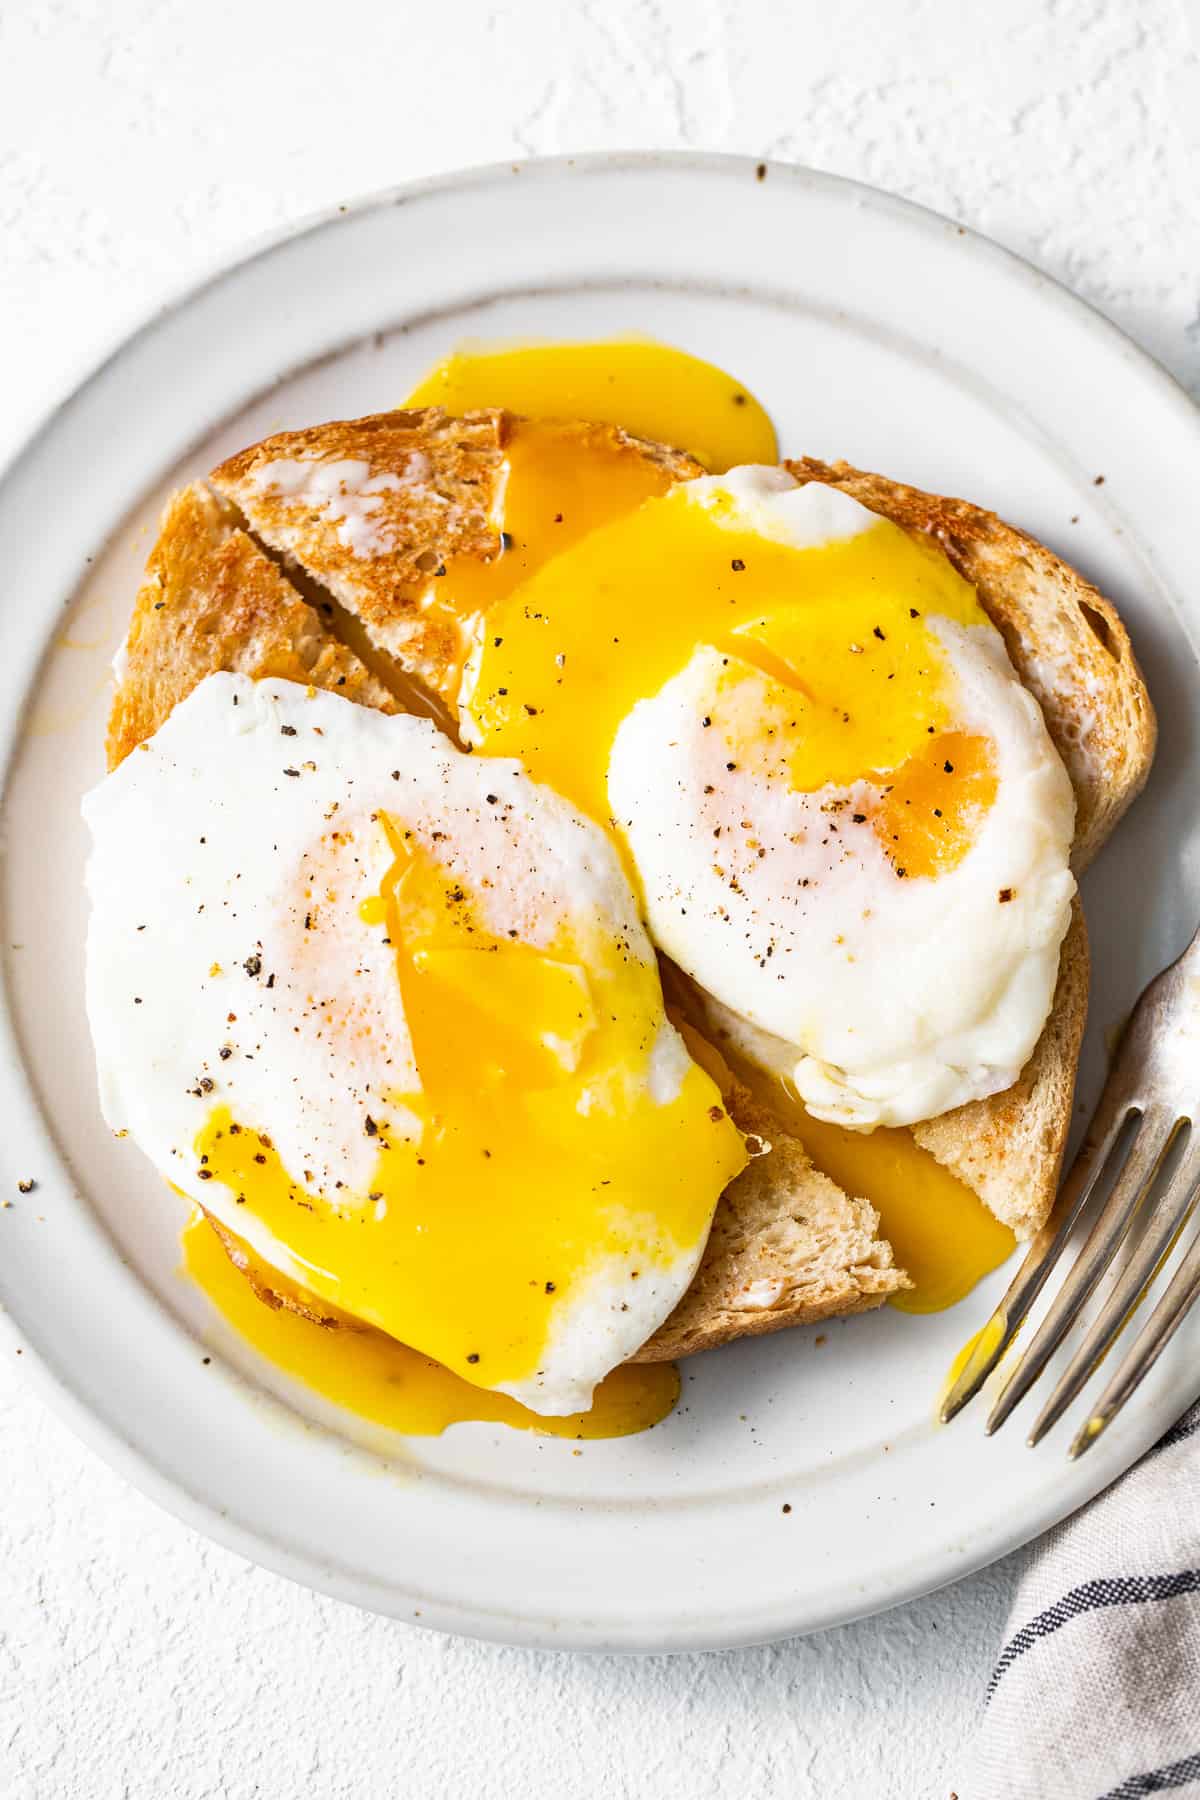 Over easy eggs served over toast.